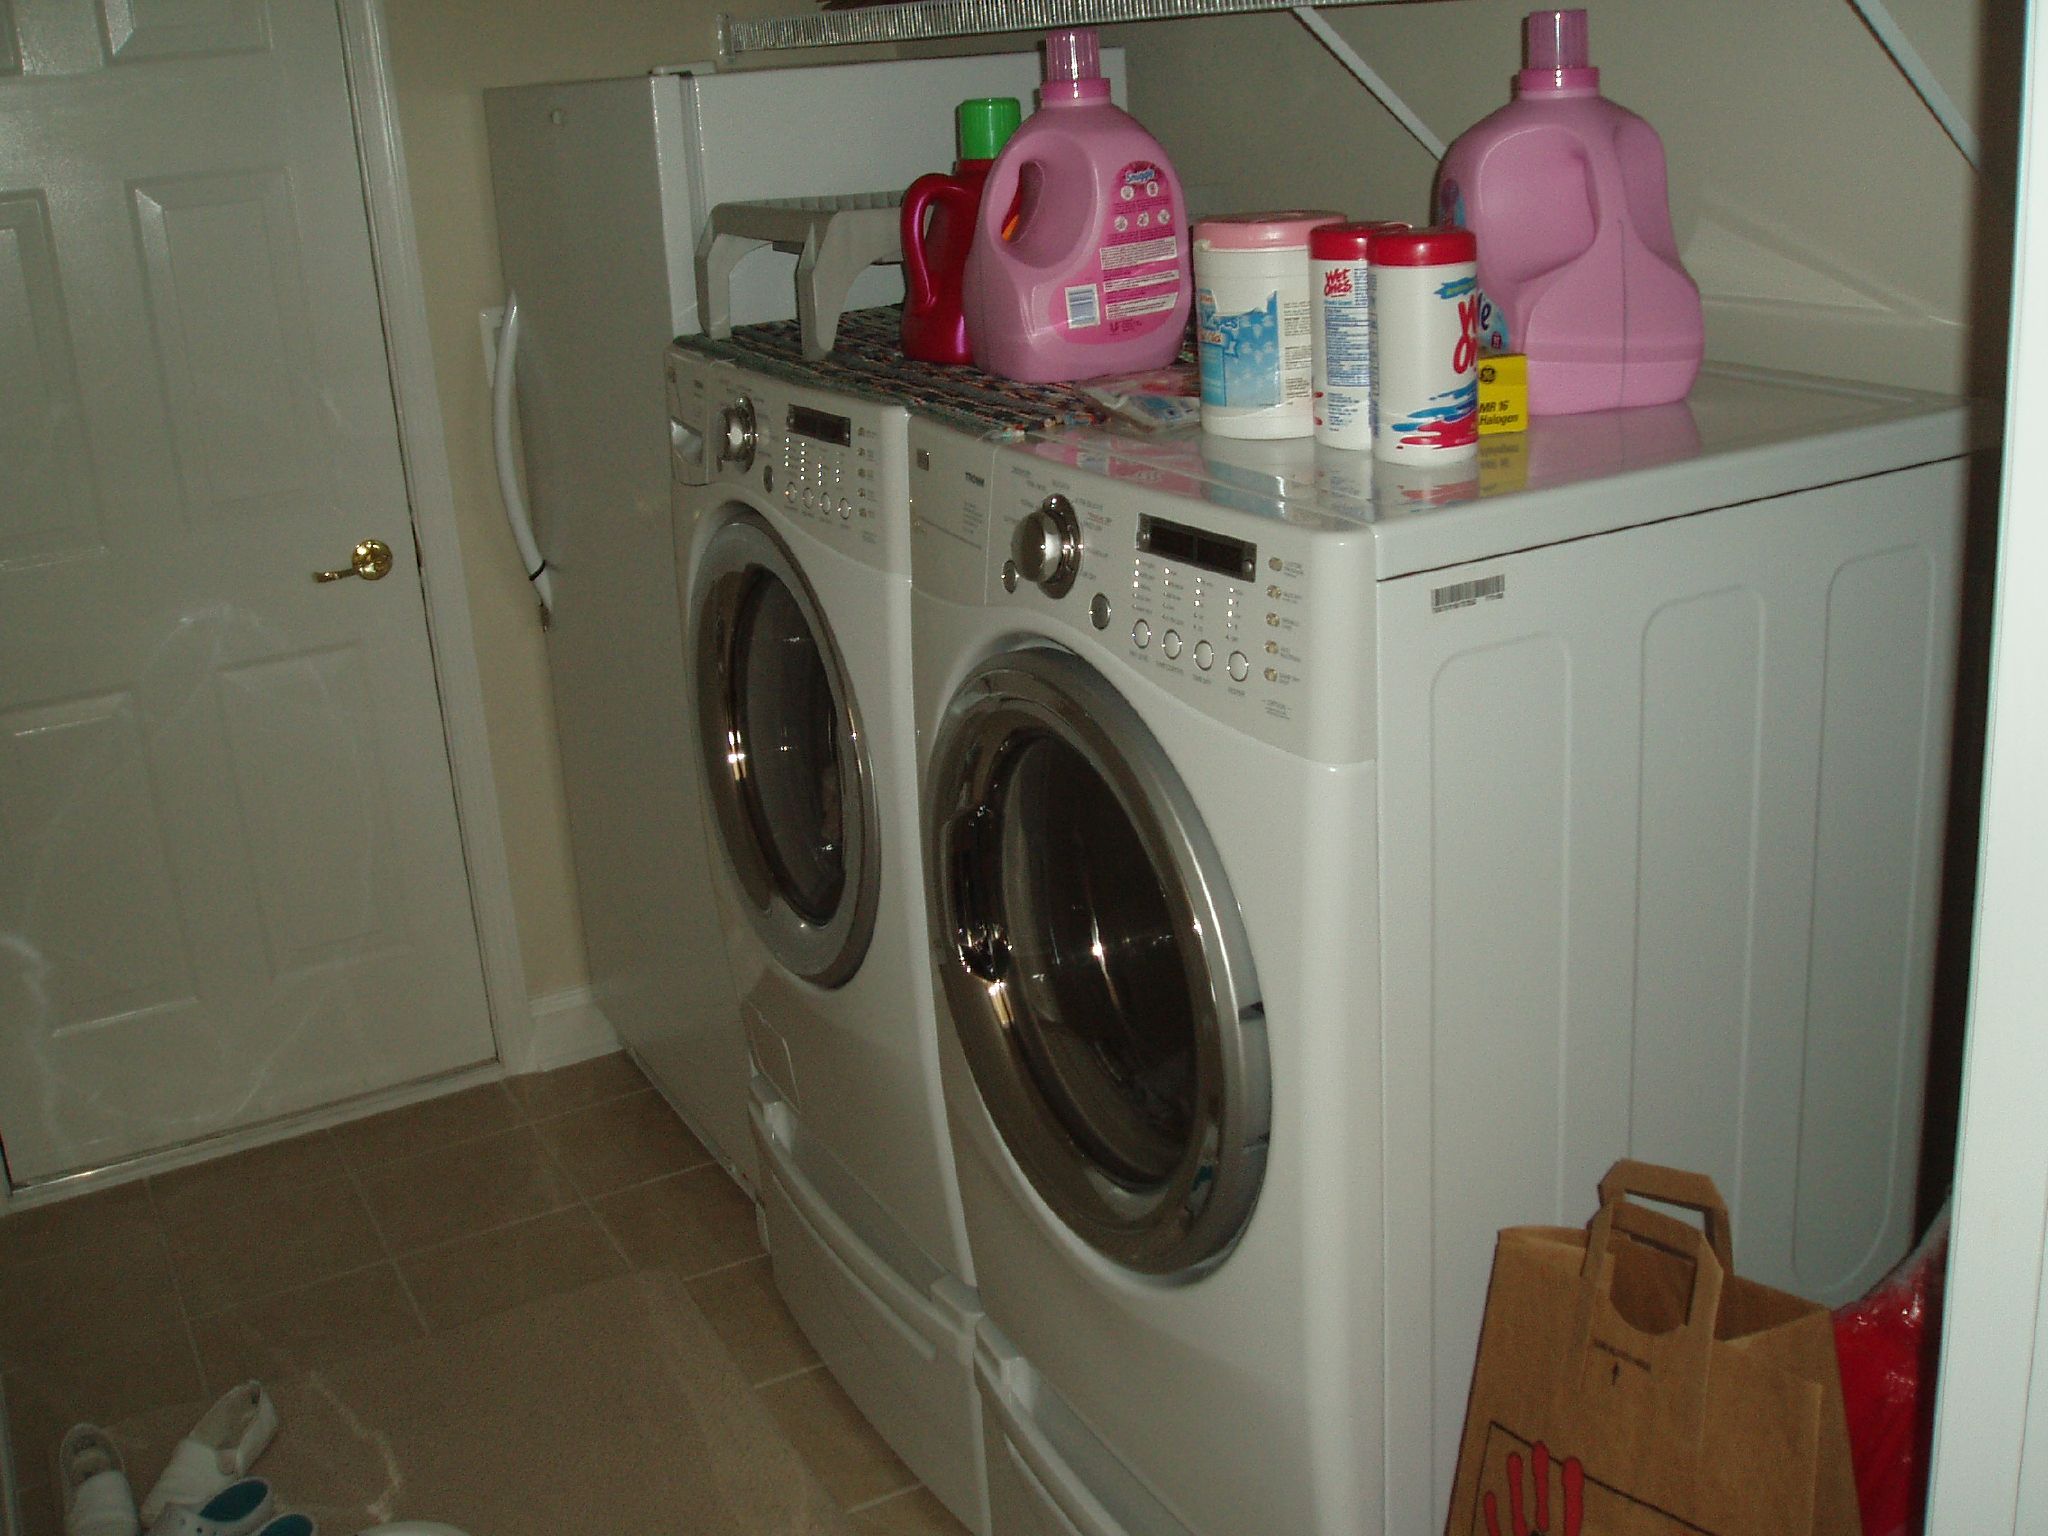 washing machines with pink deterant on them